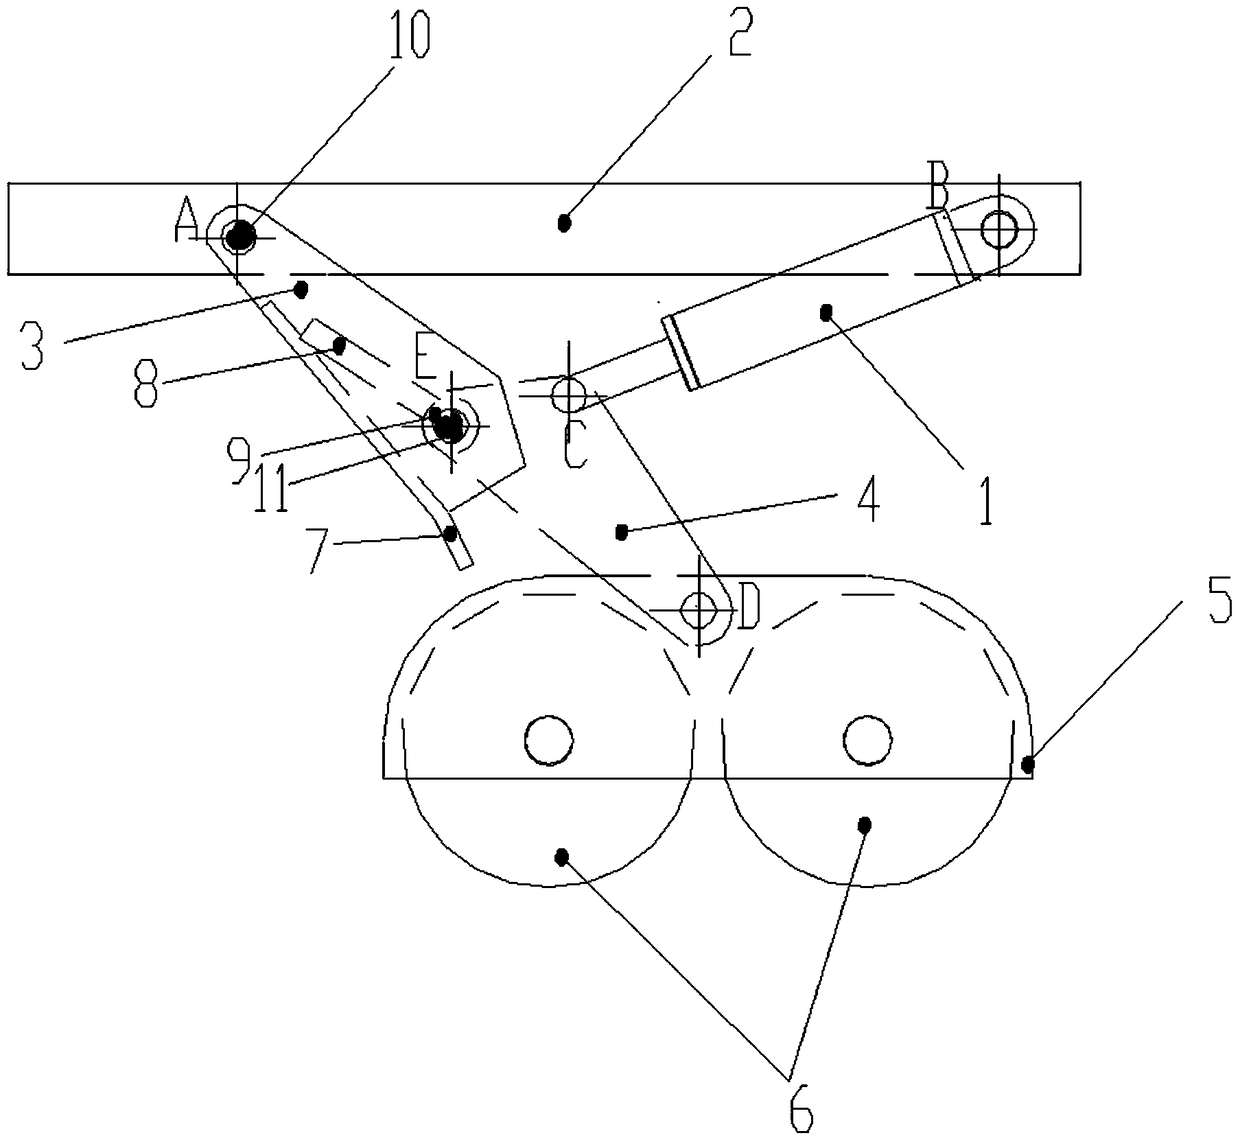 An outrigger mechanism for engineering vehicles and a bridge inspection vehicle